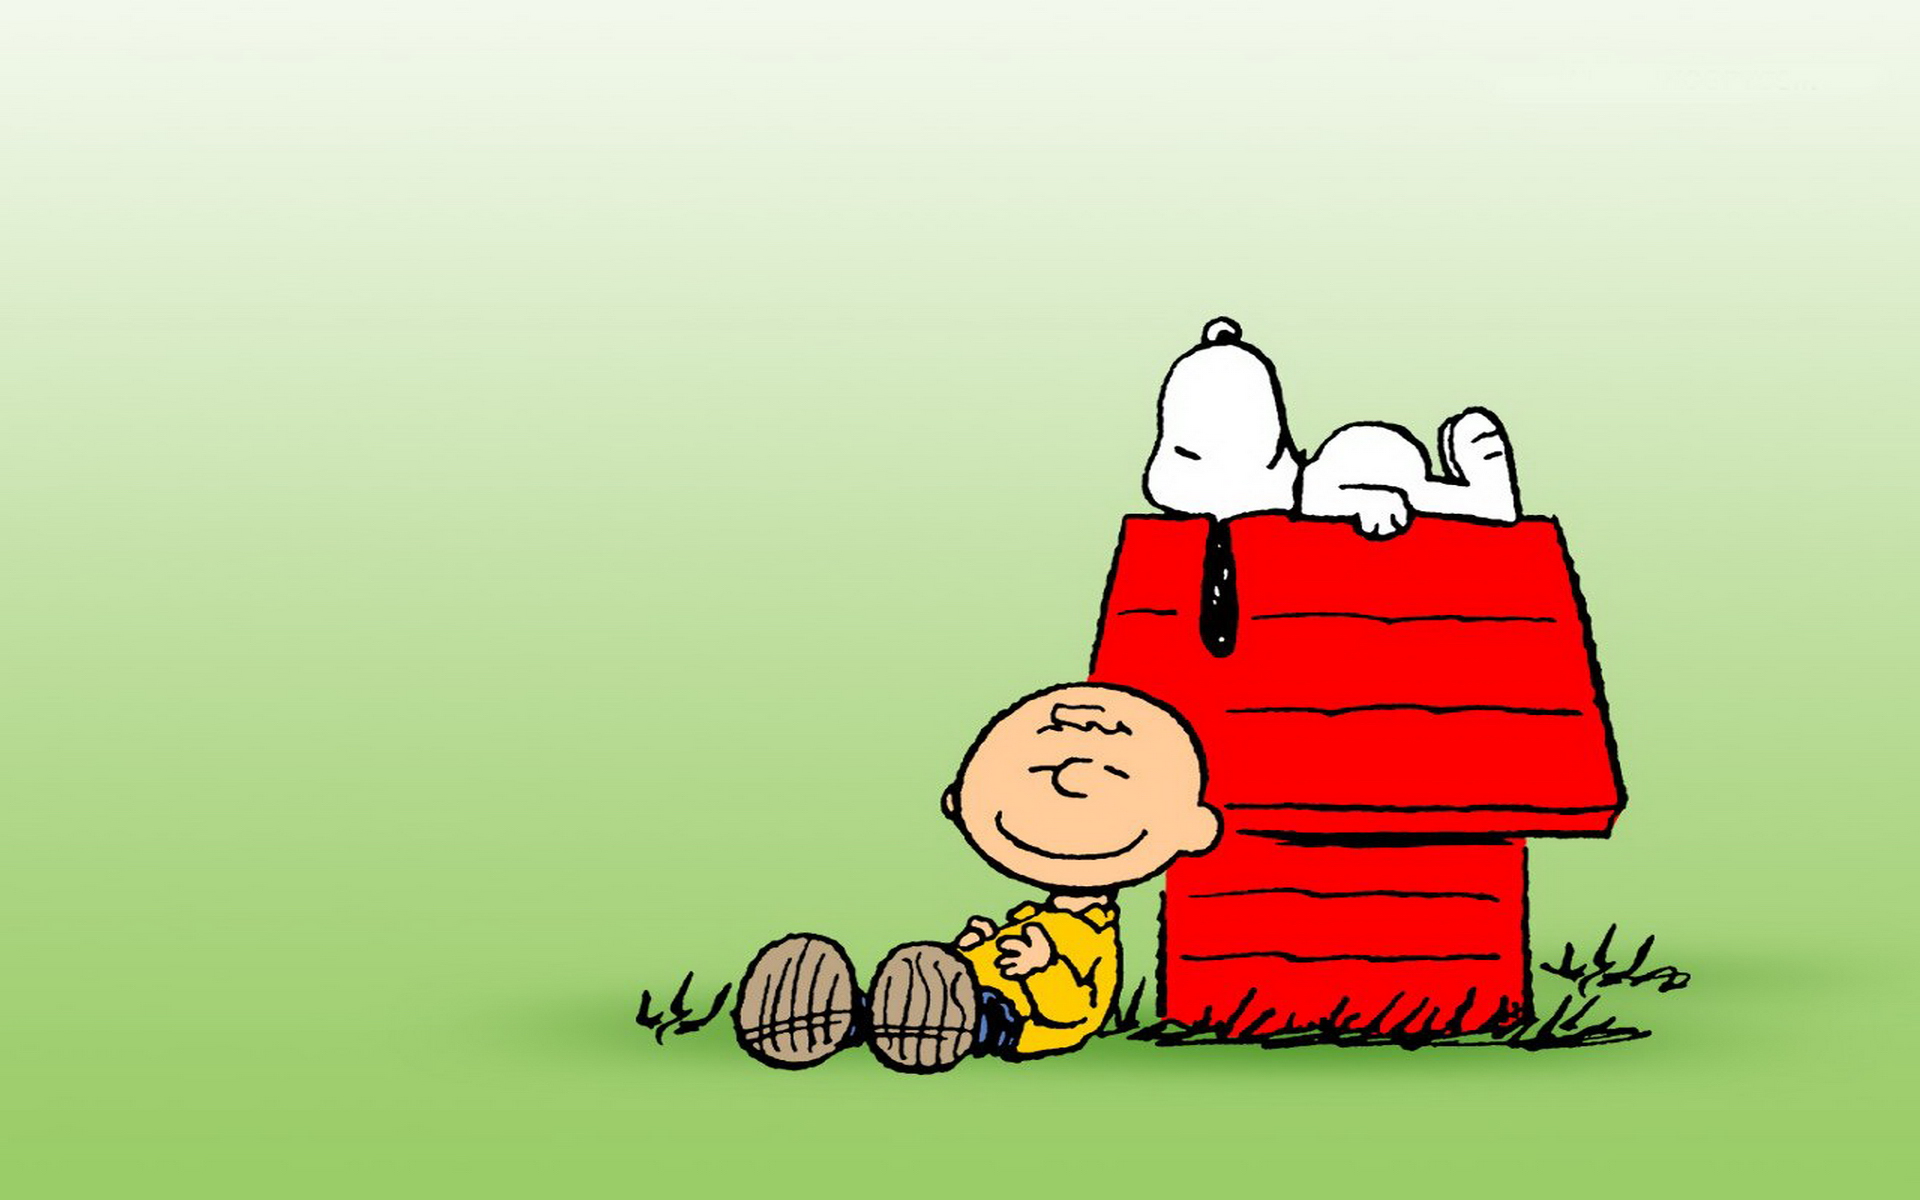 Charlie Brown Peanuts Ics Snoopy High Definition Wallpaper For